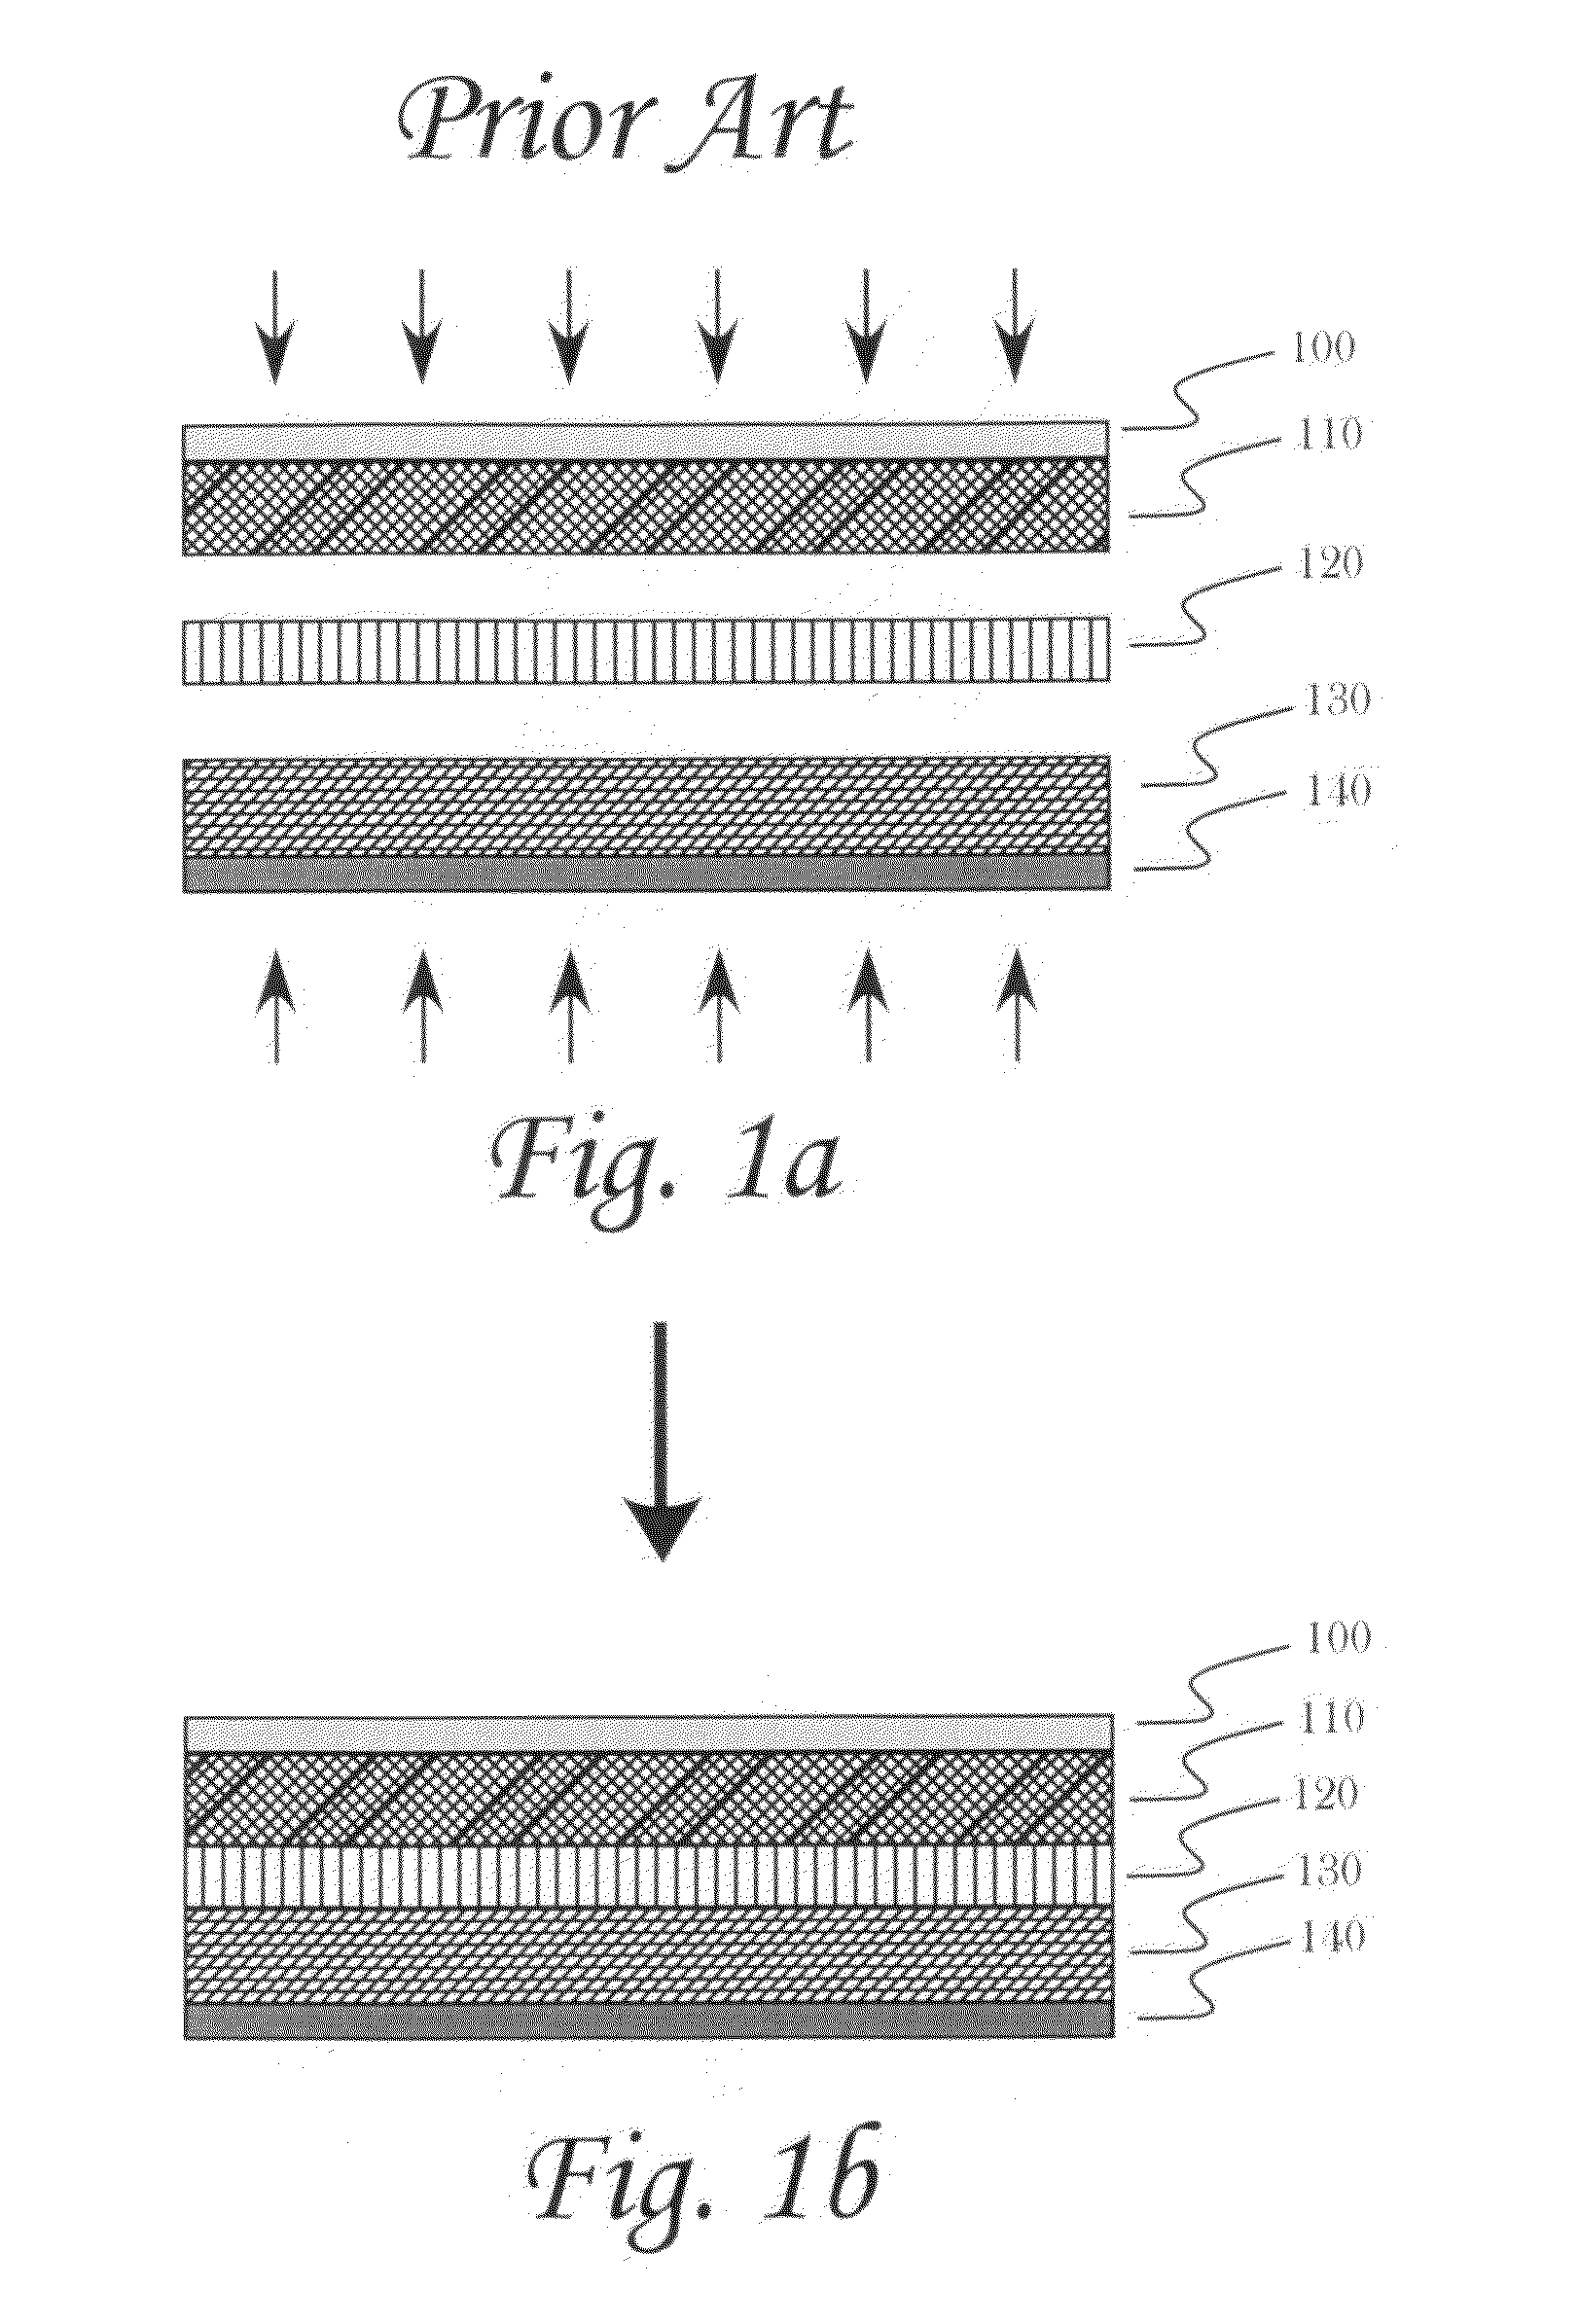 Polymer supported electrodes